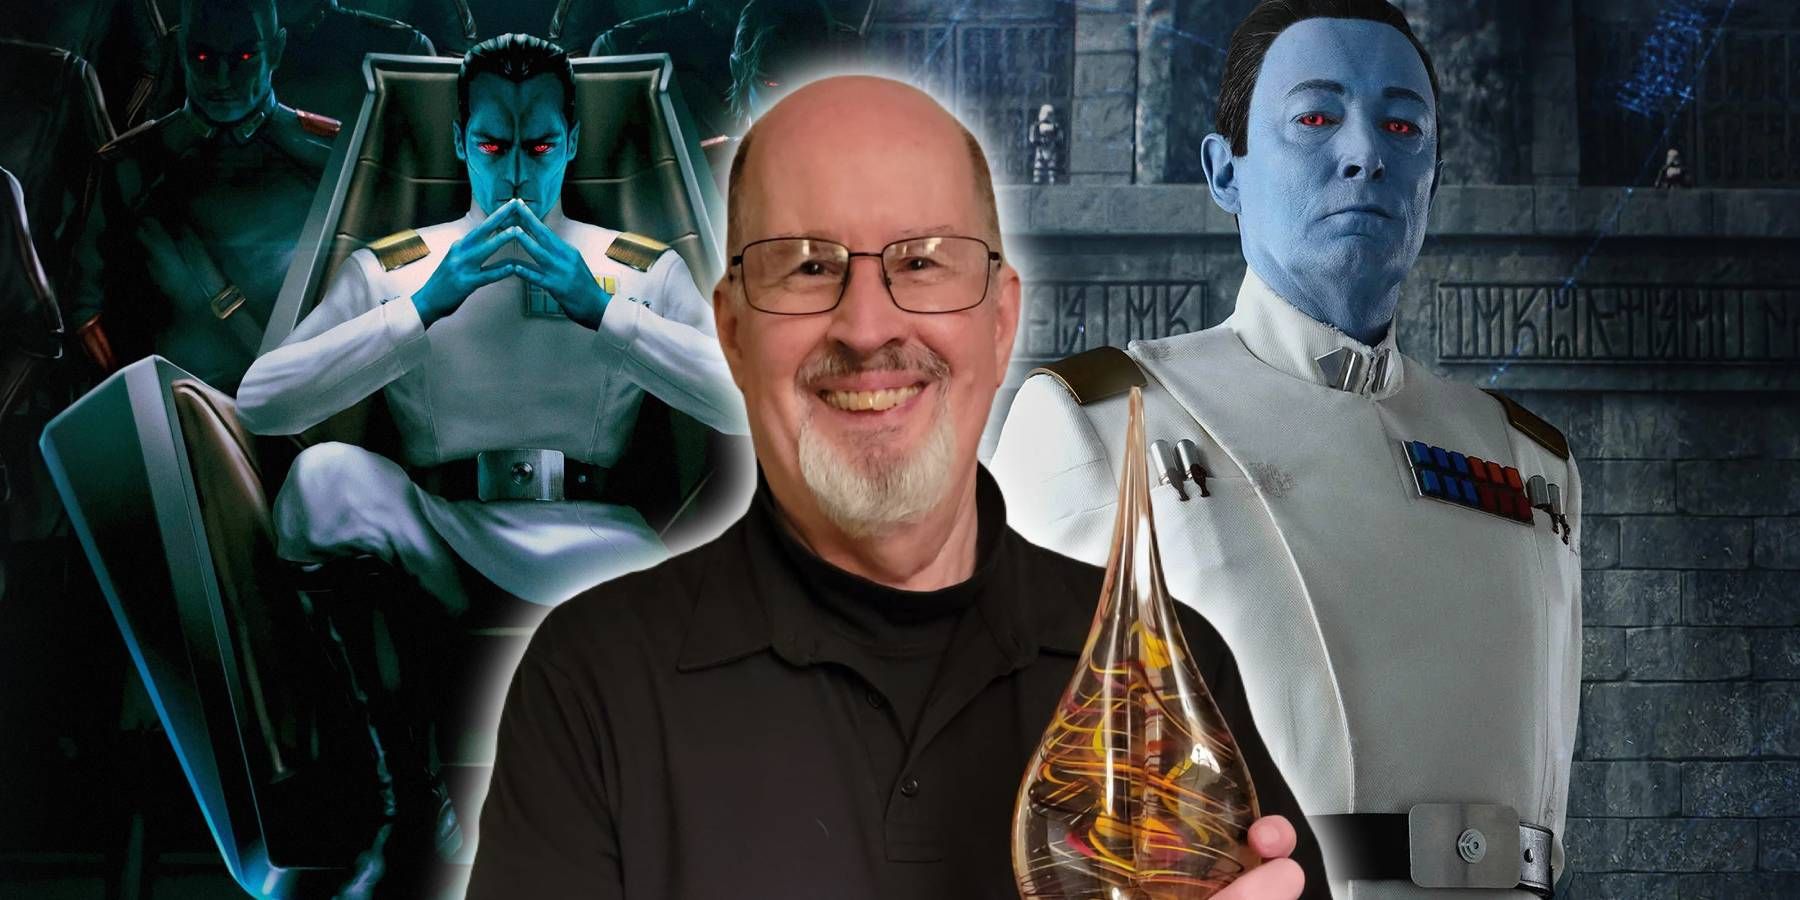 Grand Admiral Thrawn from Star Wars in drawn and live-action form as portrayed by Lars Mikkelsen with author Timothy Zahn